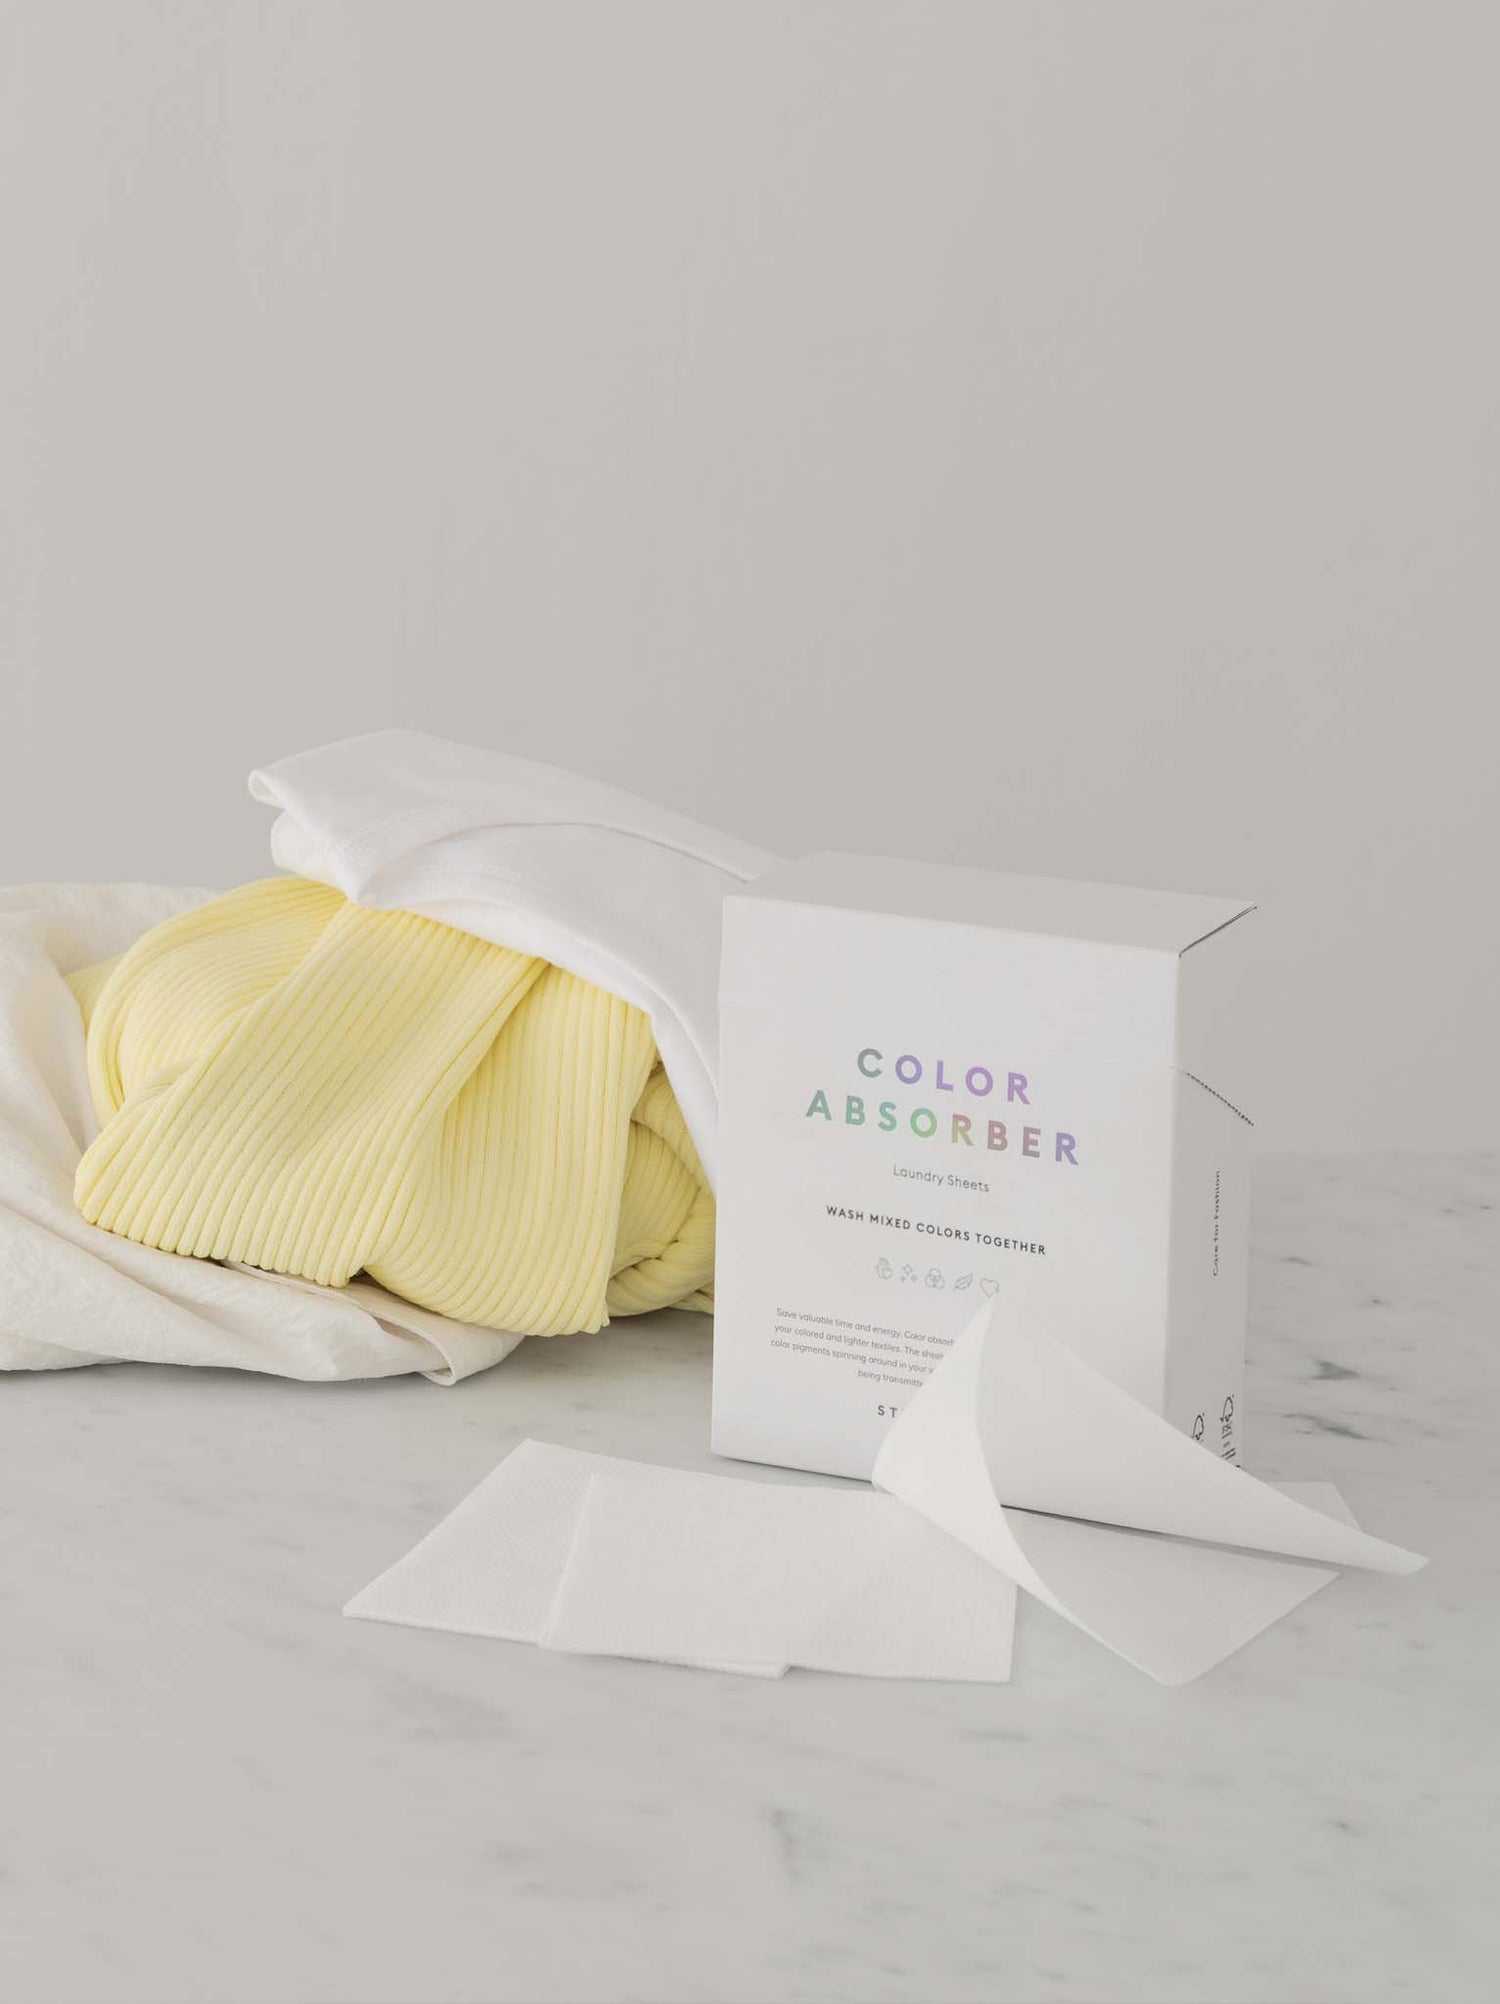 Steamery - Color Absorber Laundry Sheets